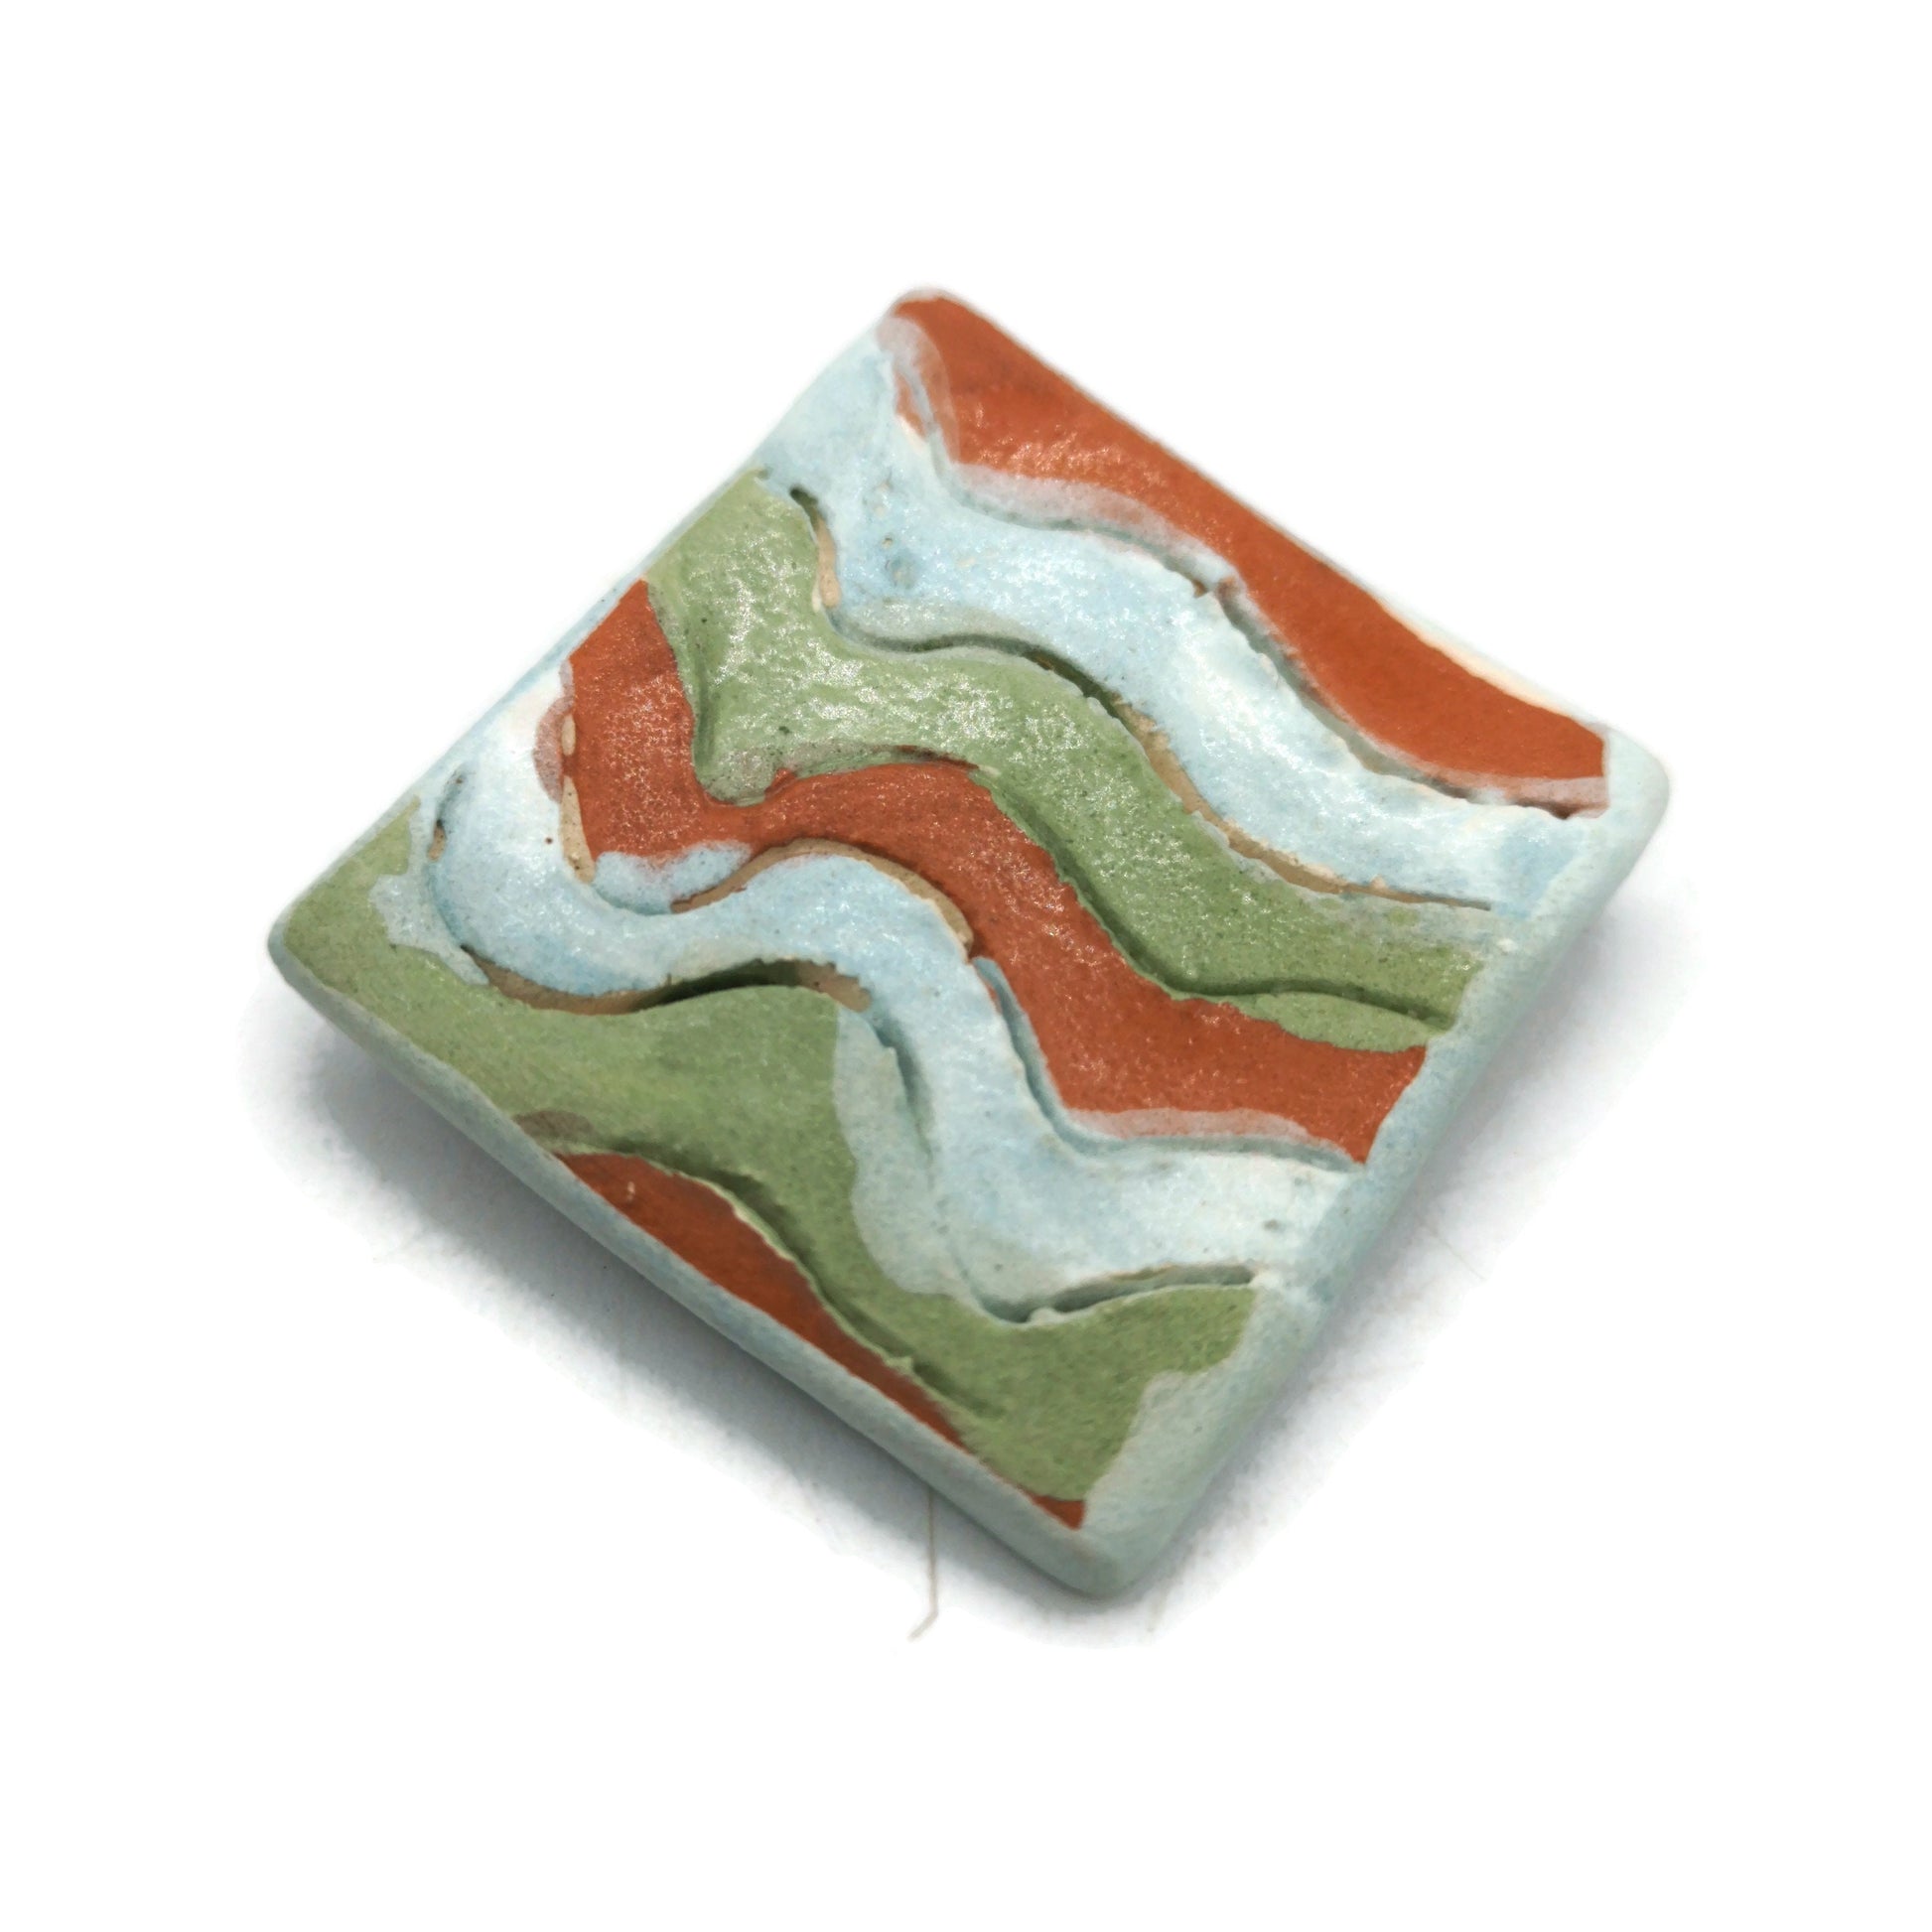 Handmade Ceramic Brooch For Women 9th Anniversary Gifts, Hand Painted Square Shaped Brooch For Mom Birthday Gift, 50th birthday gift - Ceramica Ana Rafael